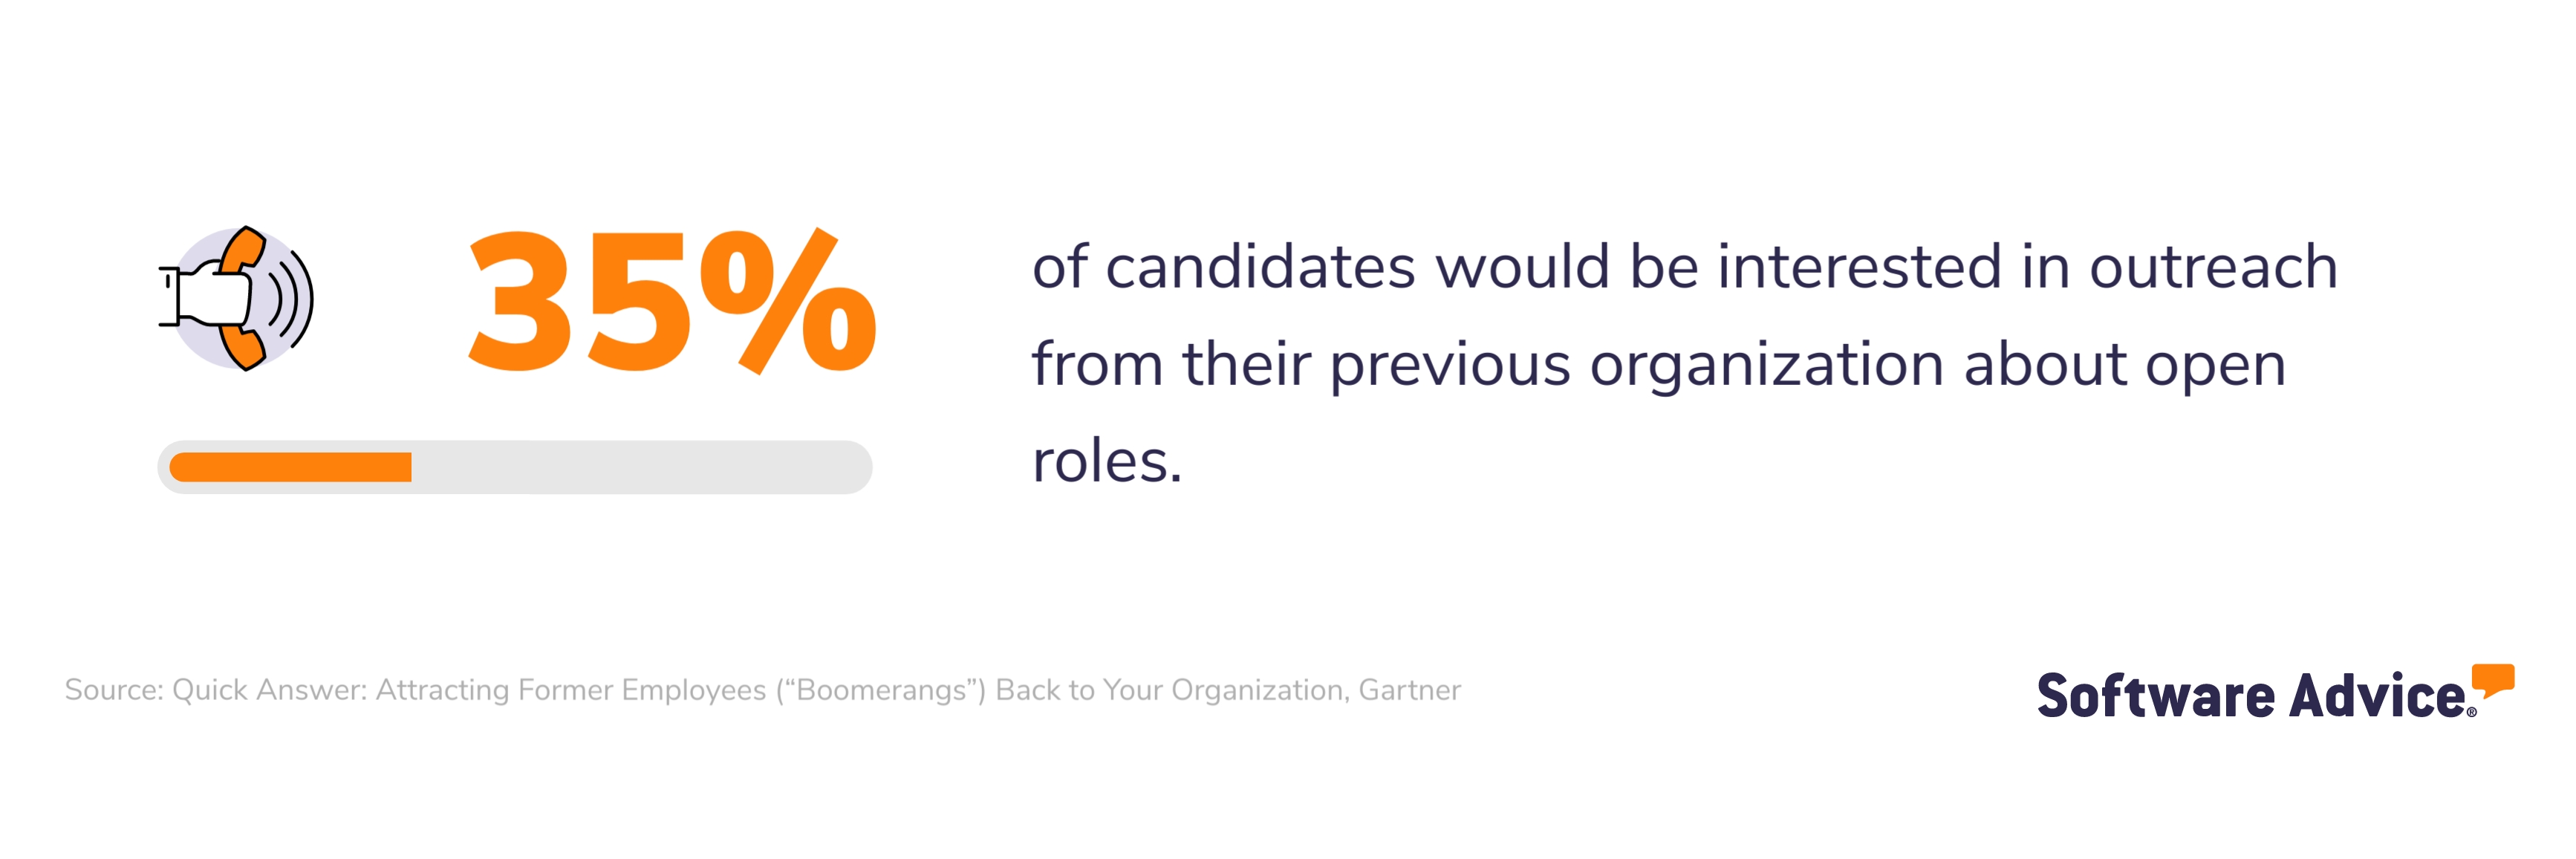 Just over a third of candidates would be interested in outreach from their previous organization about open roles